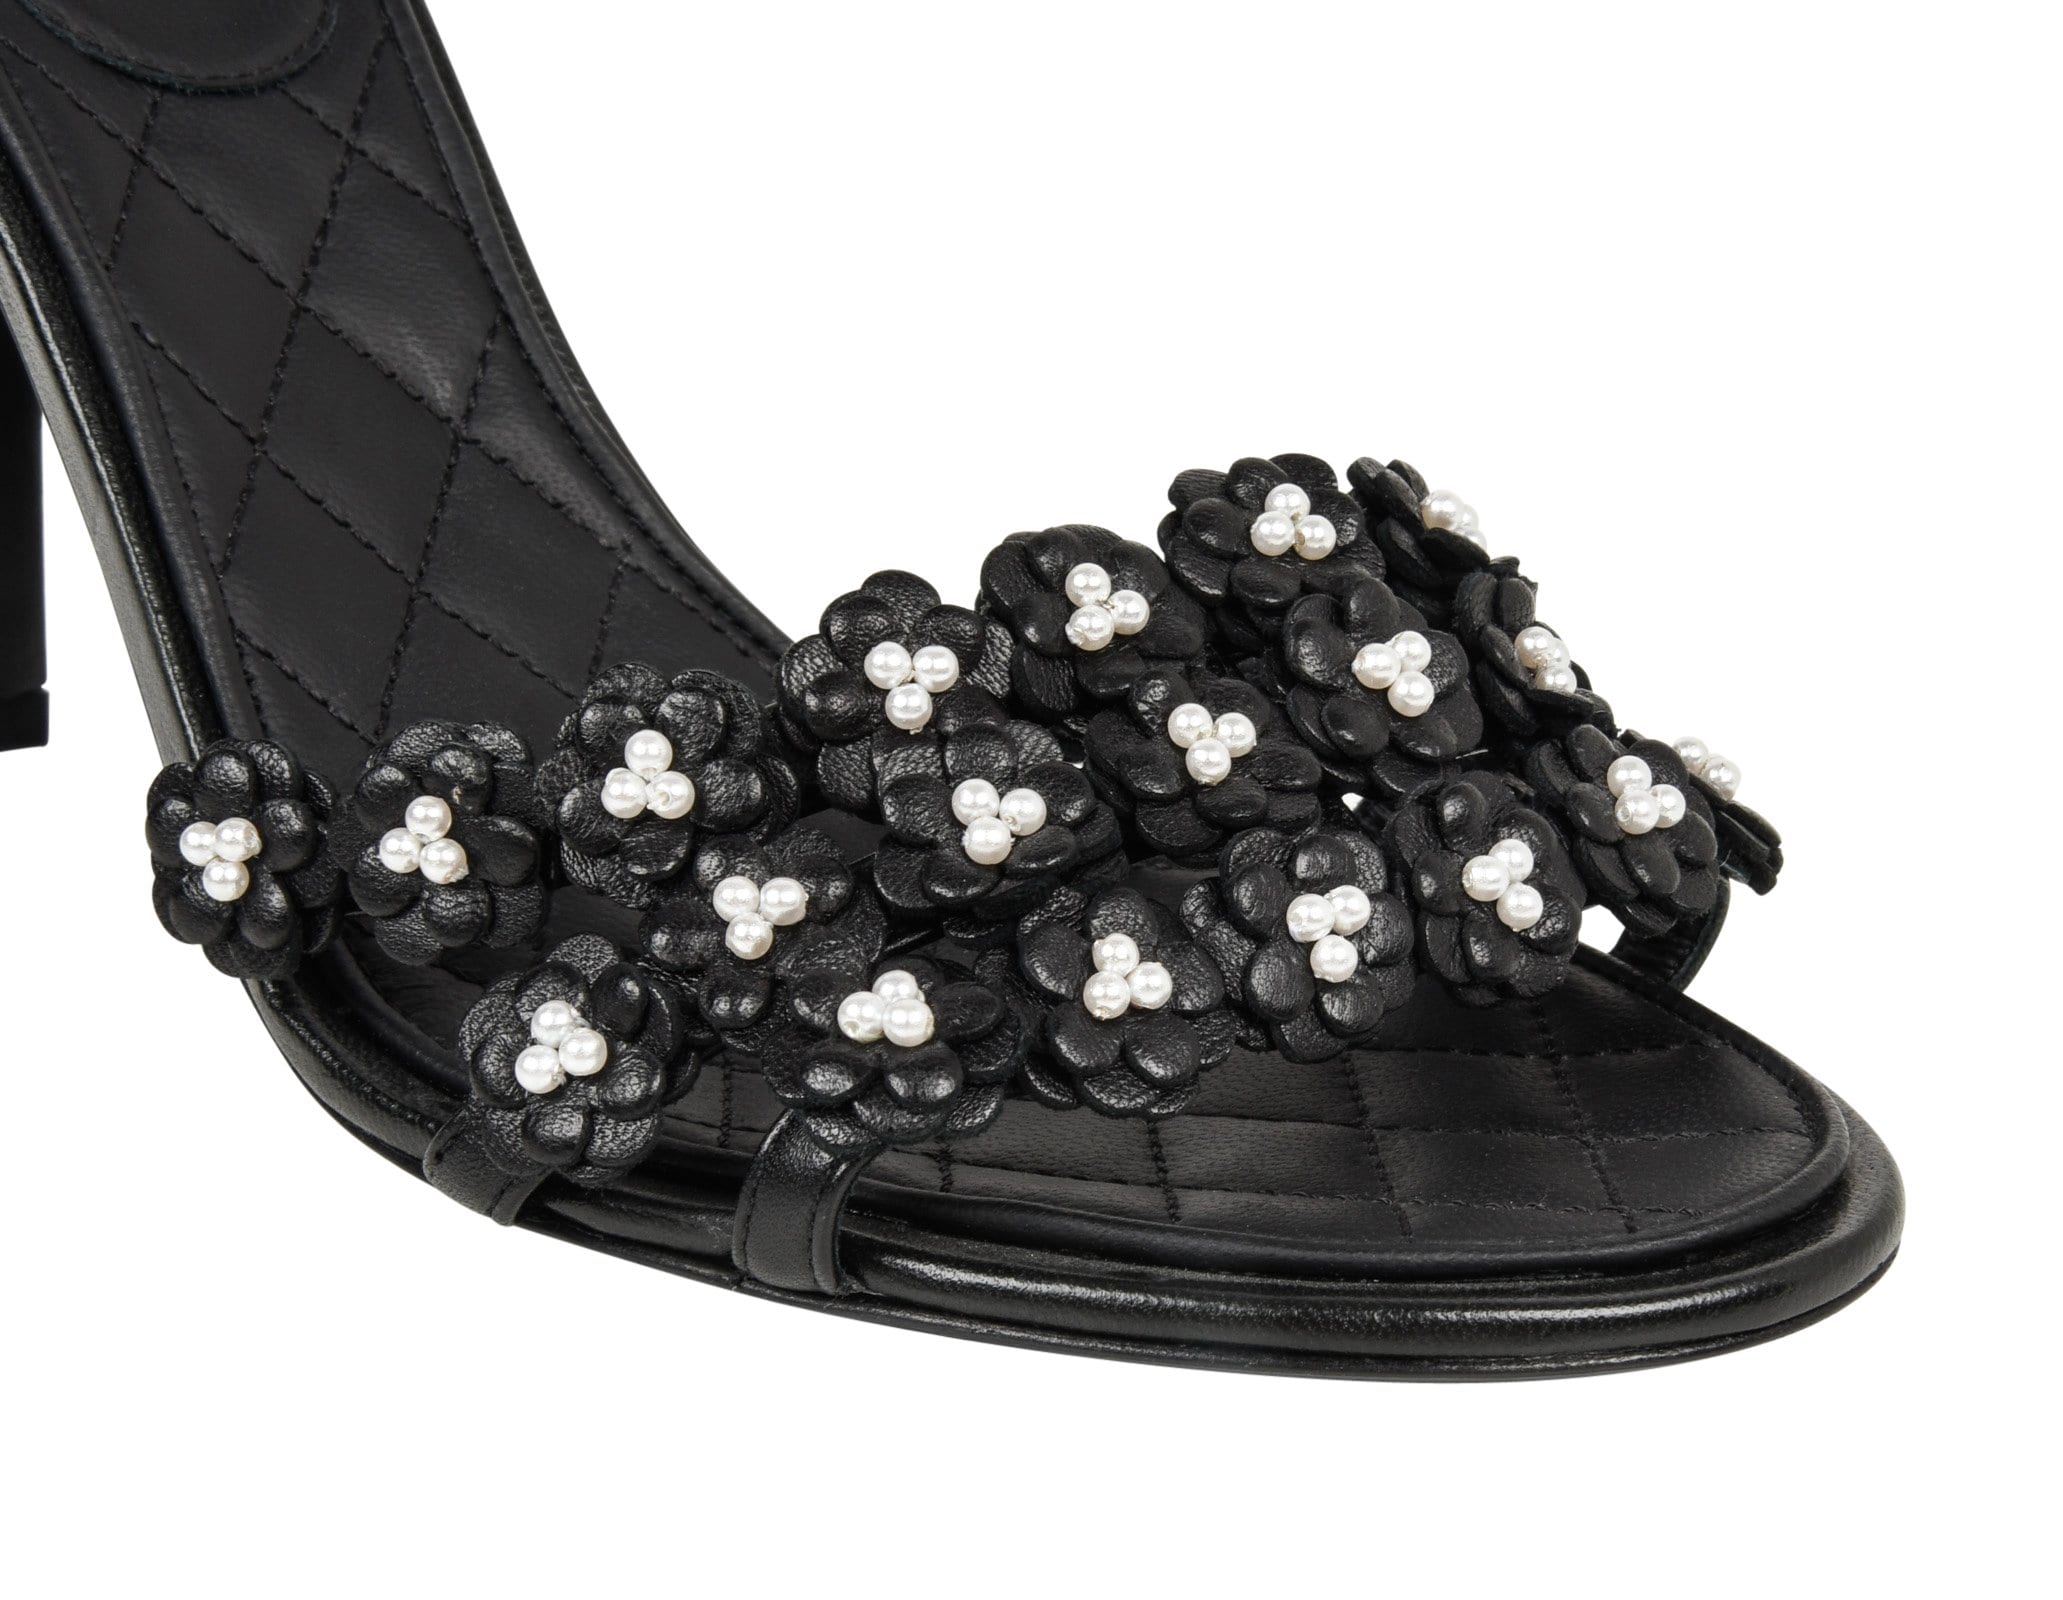 Chanel Black Leather Faux Pearl Slide Flat Sandals Size 39 Chanel